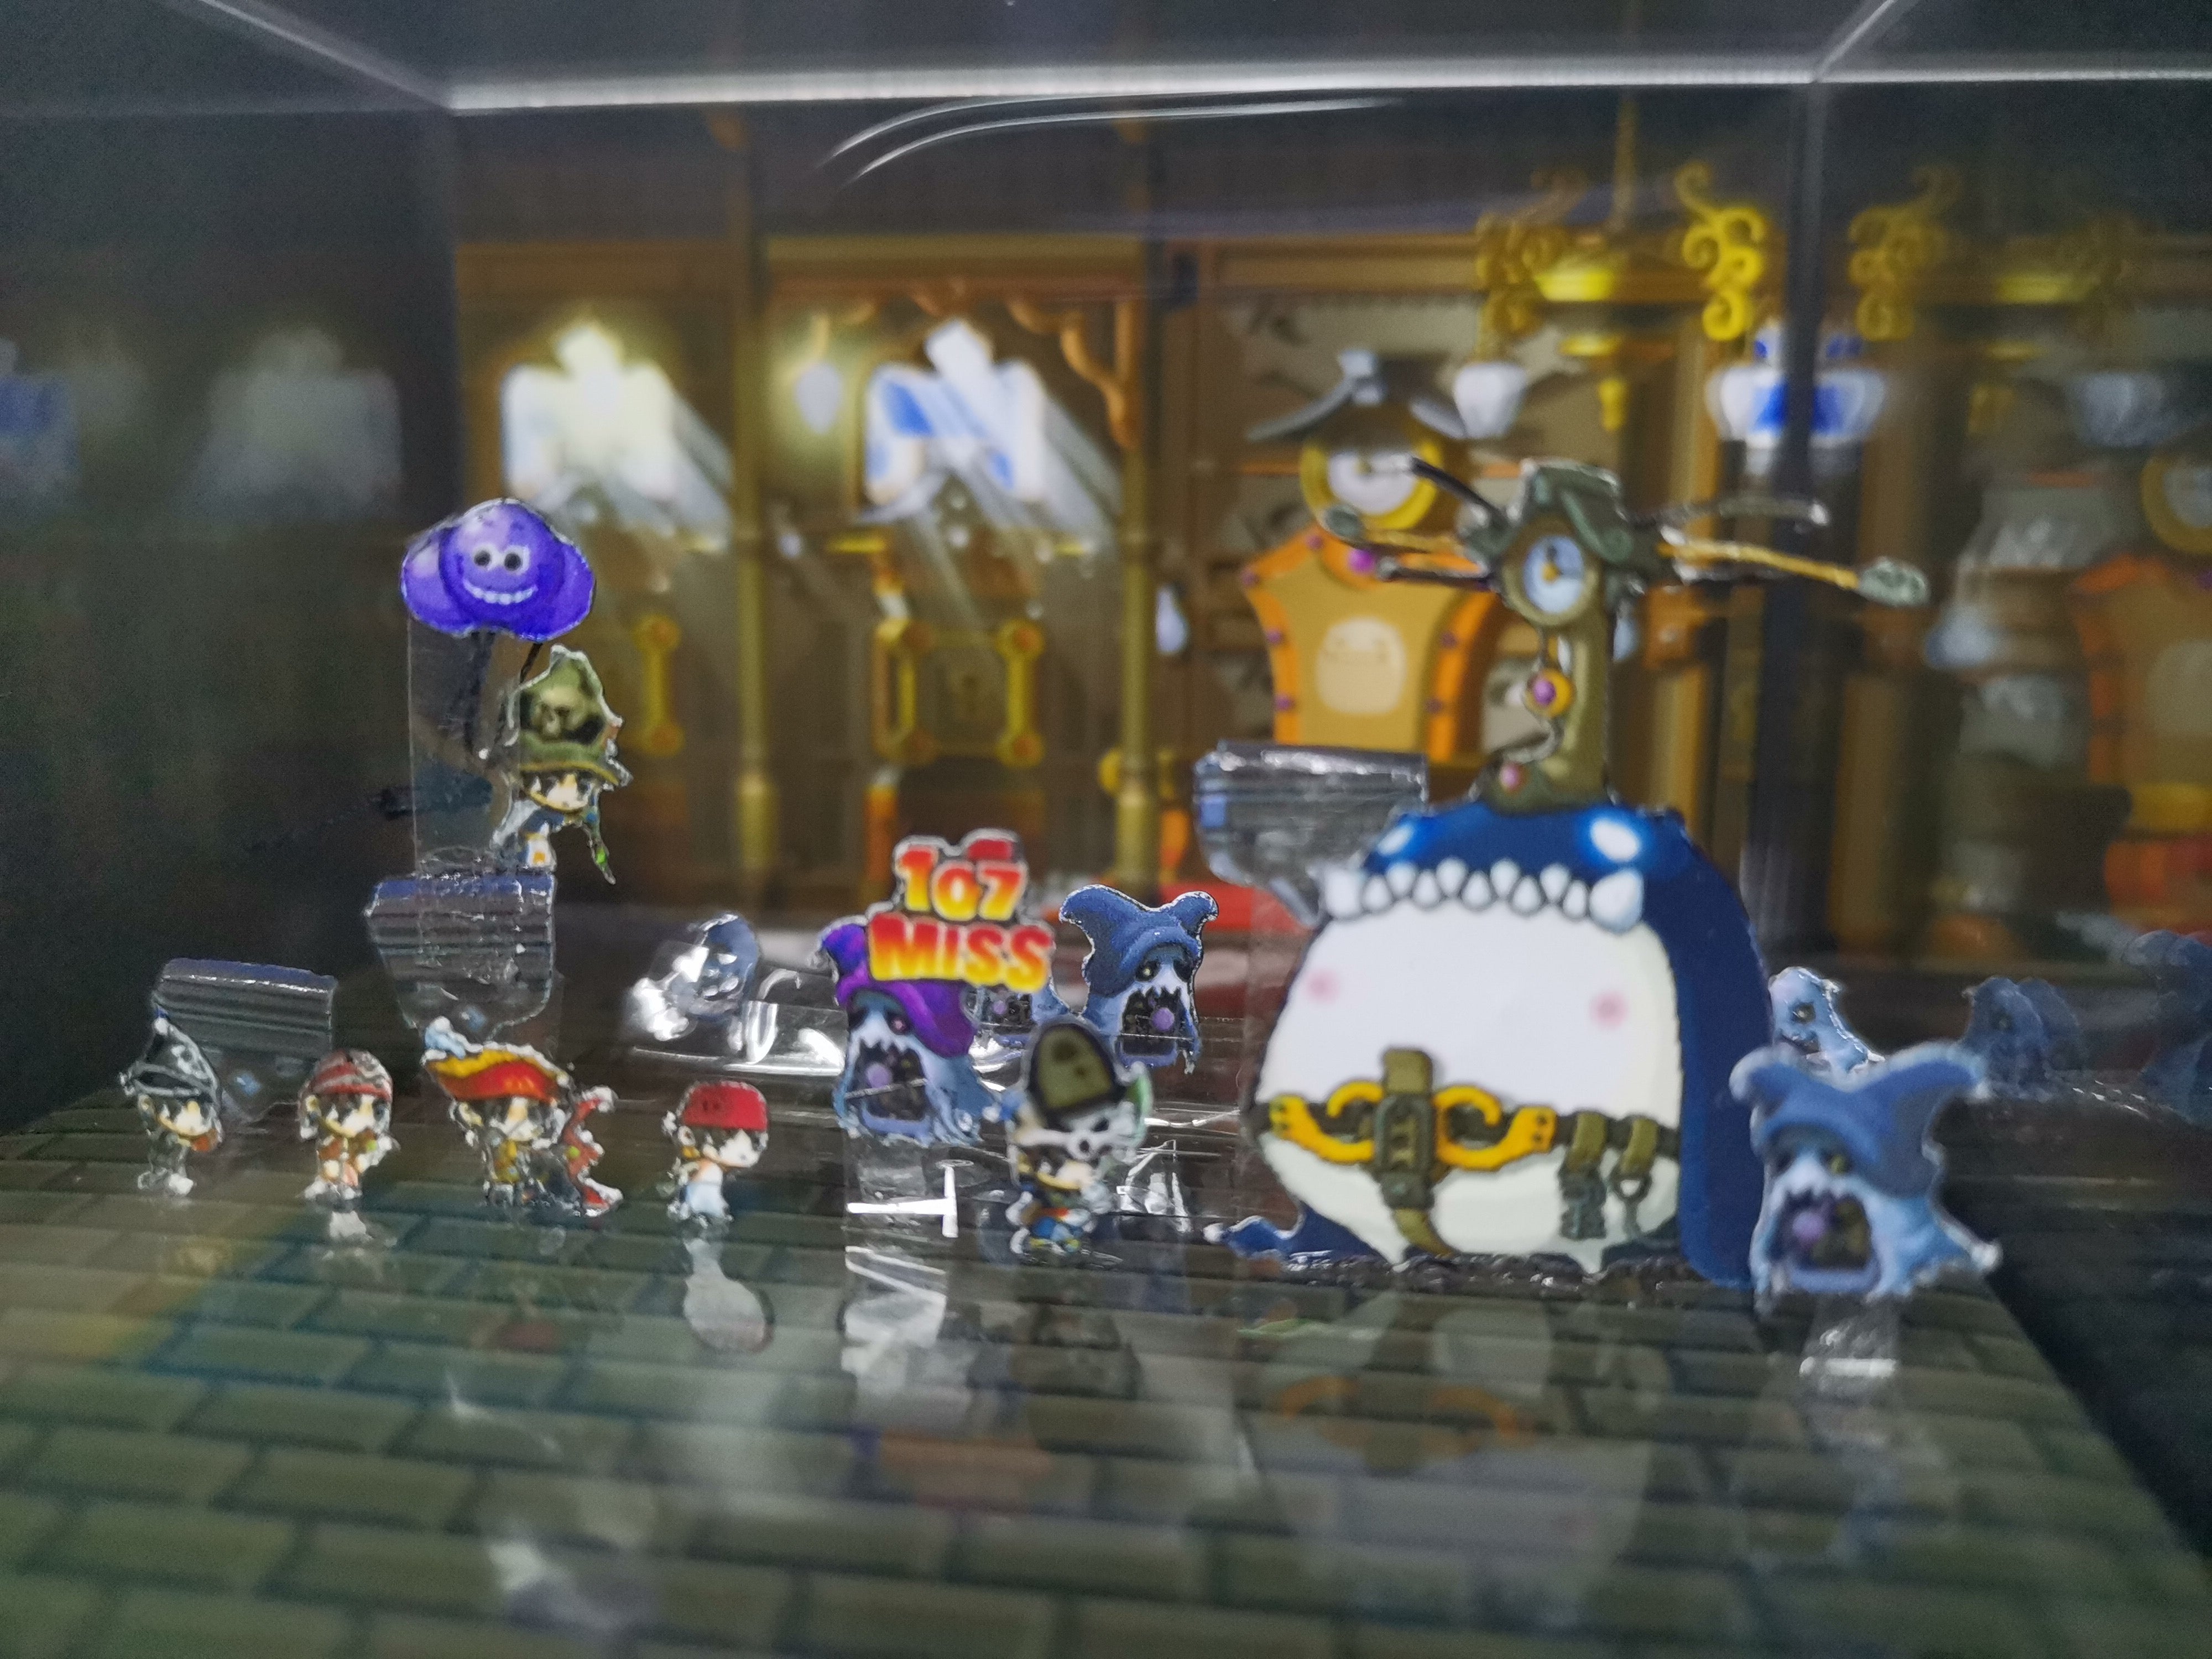 Completed Maplestory Ludibrium PQ Diorama Cube [Fully Completed] (Limited)